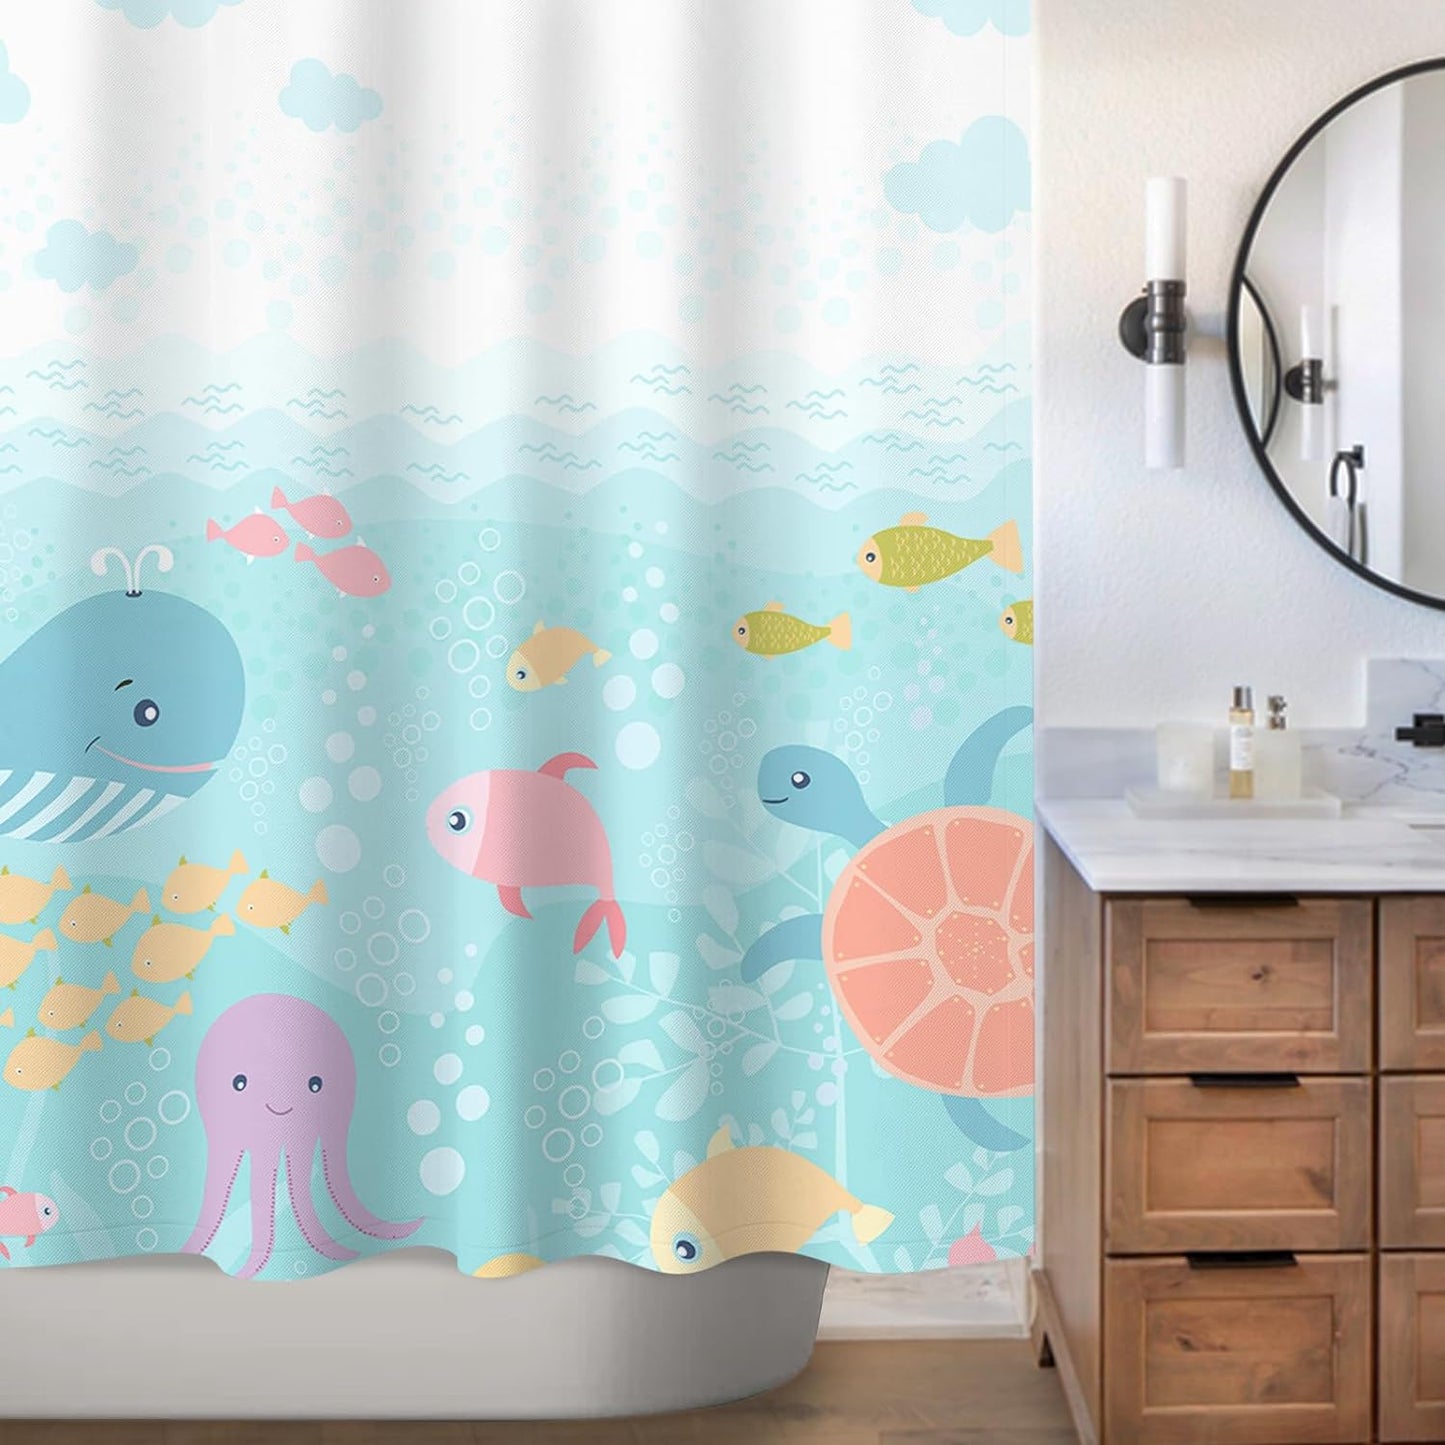 Sunlit Lovely Cartoon Sea Creatures Fabric Shower Curtain for Kids, Whale Turtle and Fish Bathroom Decor Curtain for Girls and Boys